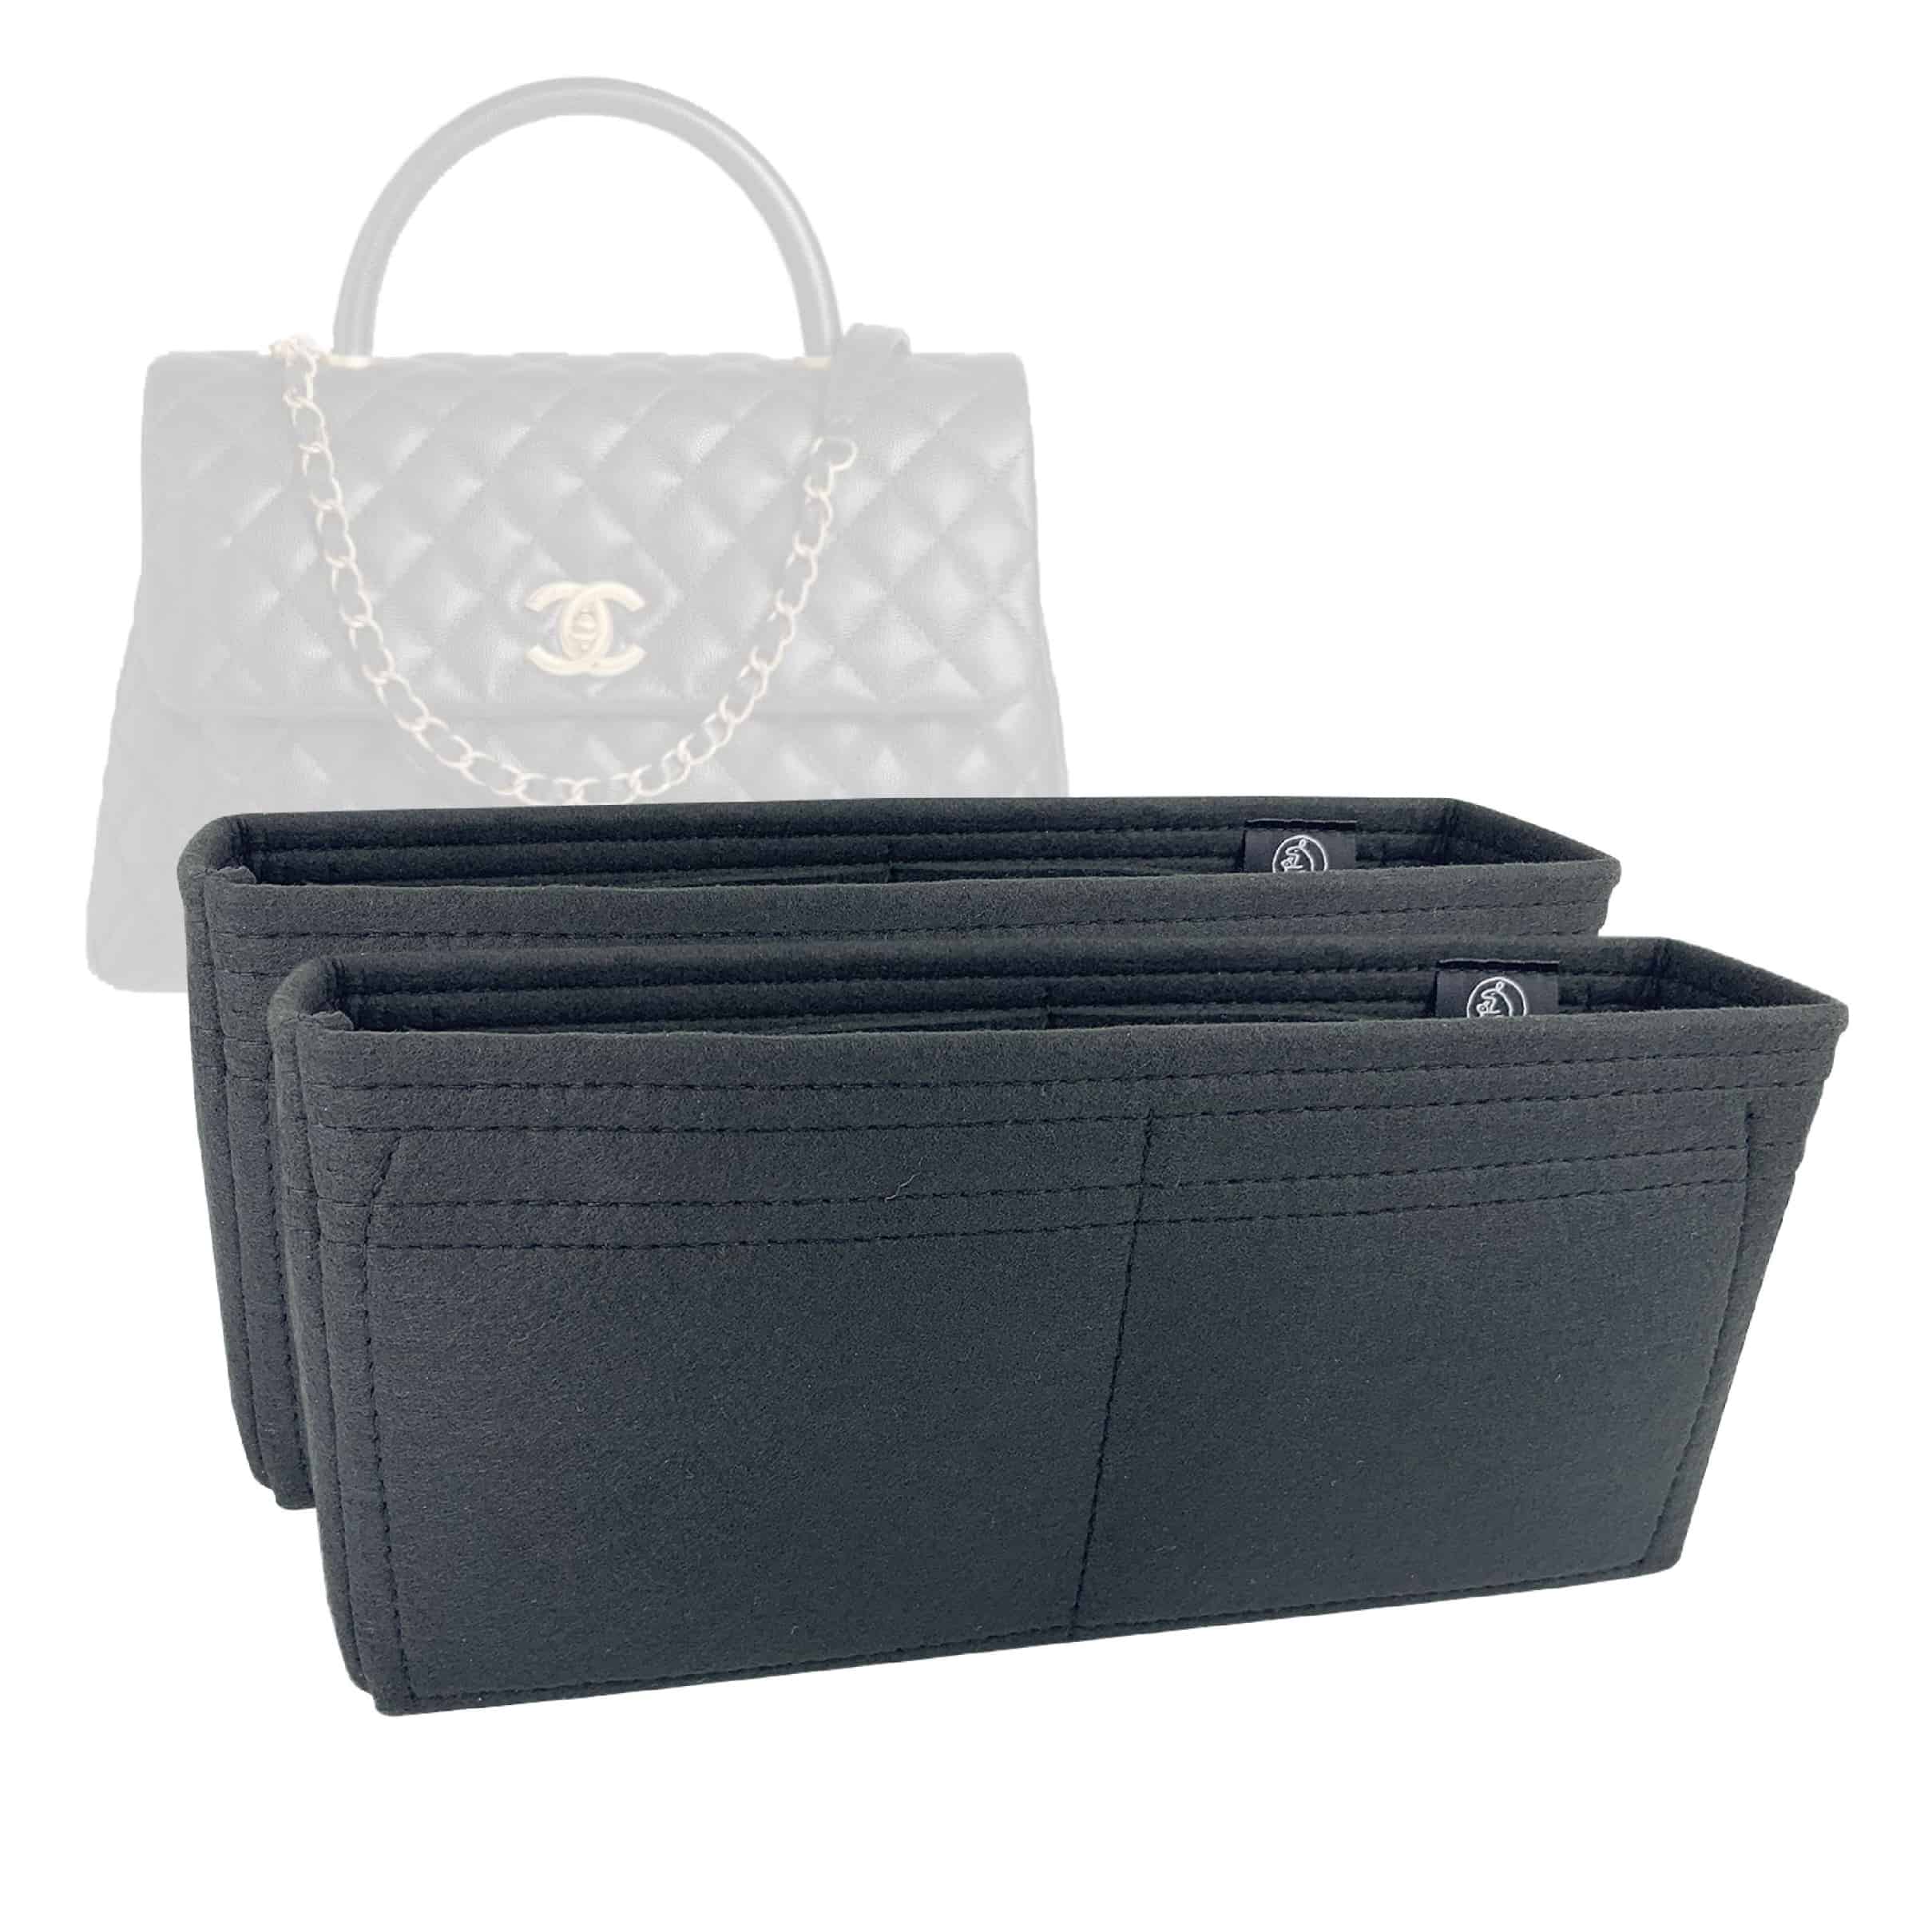 Tote Bag Organizer For Chanel GST tote Bag (Set of 2)